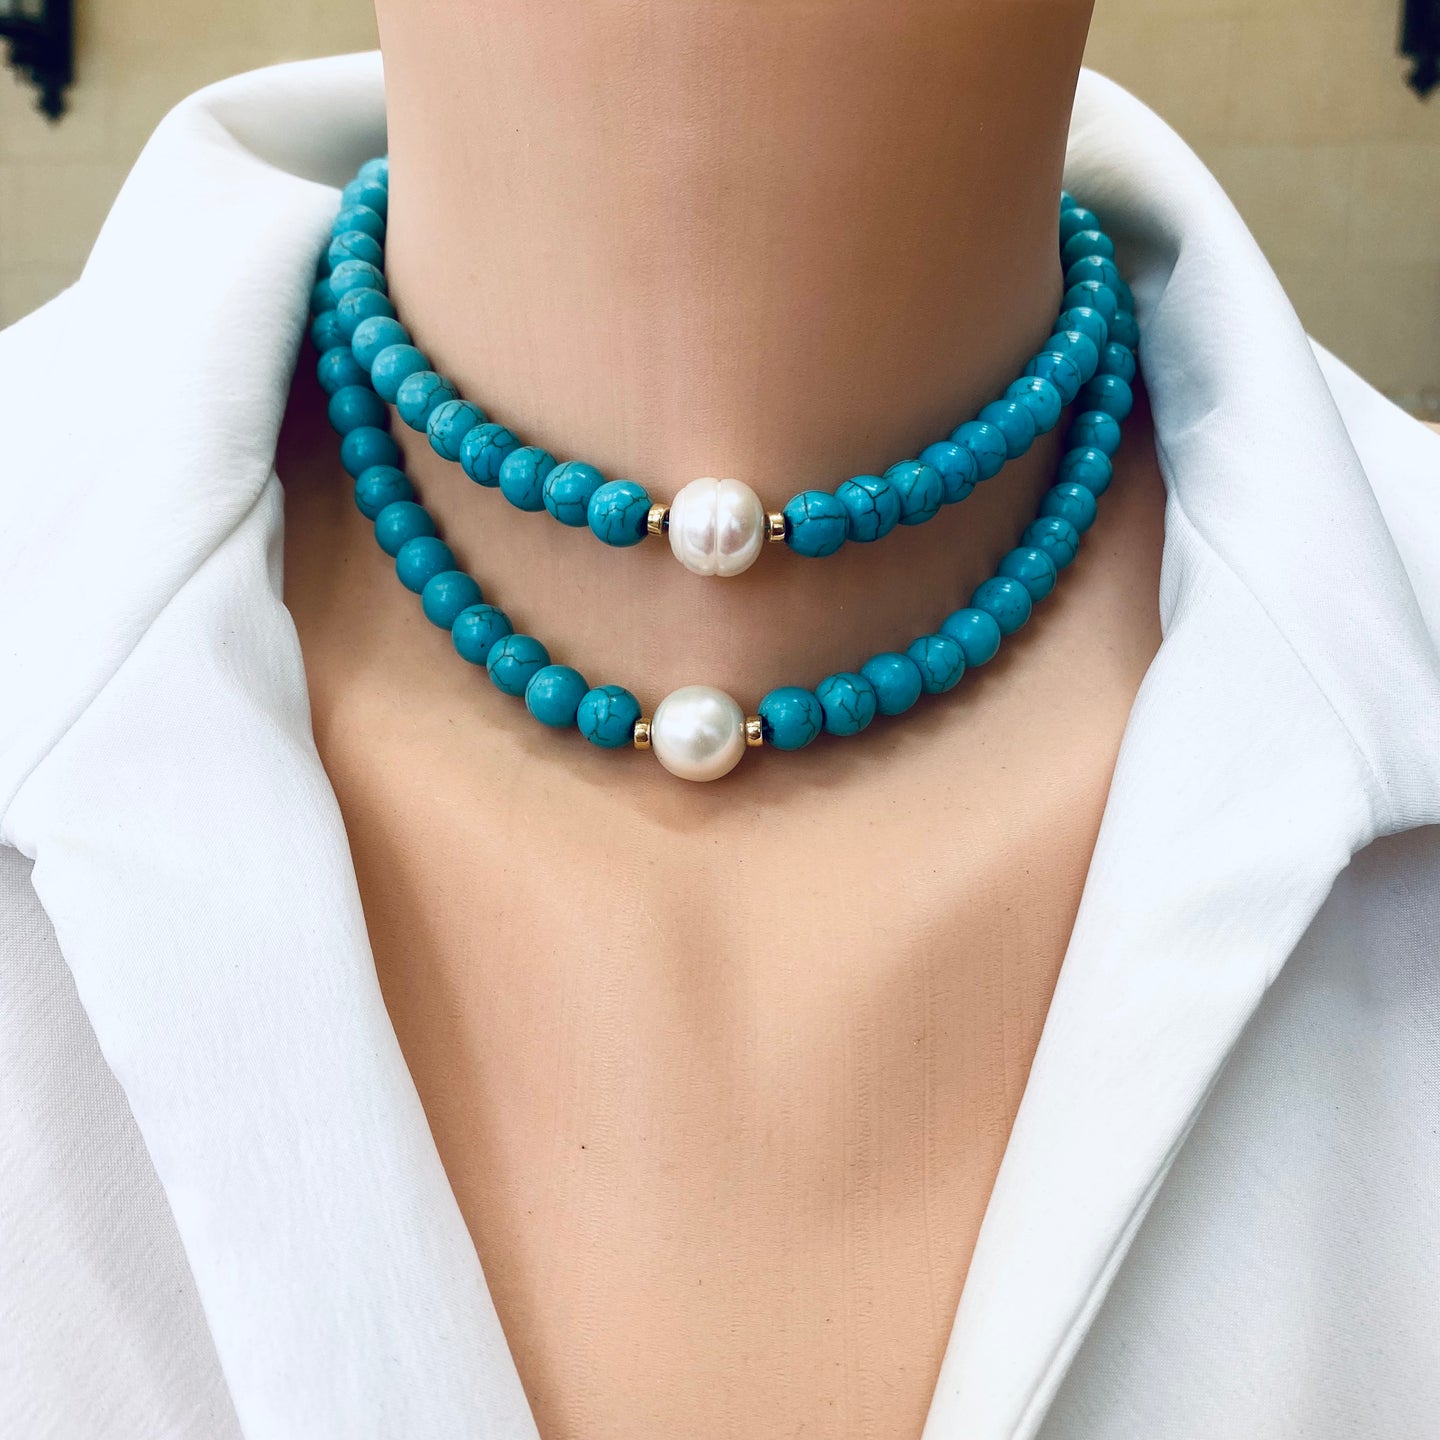 Turquoise with Fresh Water Pearl Choker Necklace, Gold Filled, Summer Jewelry, 14